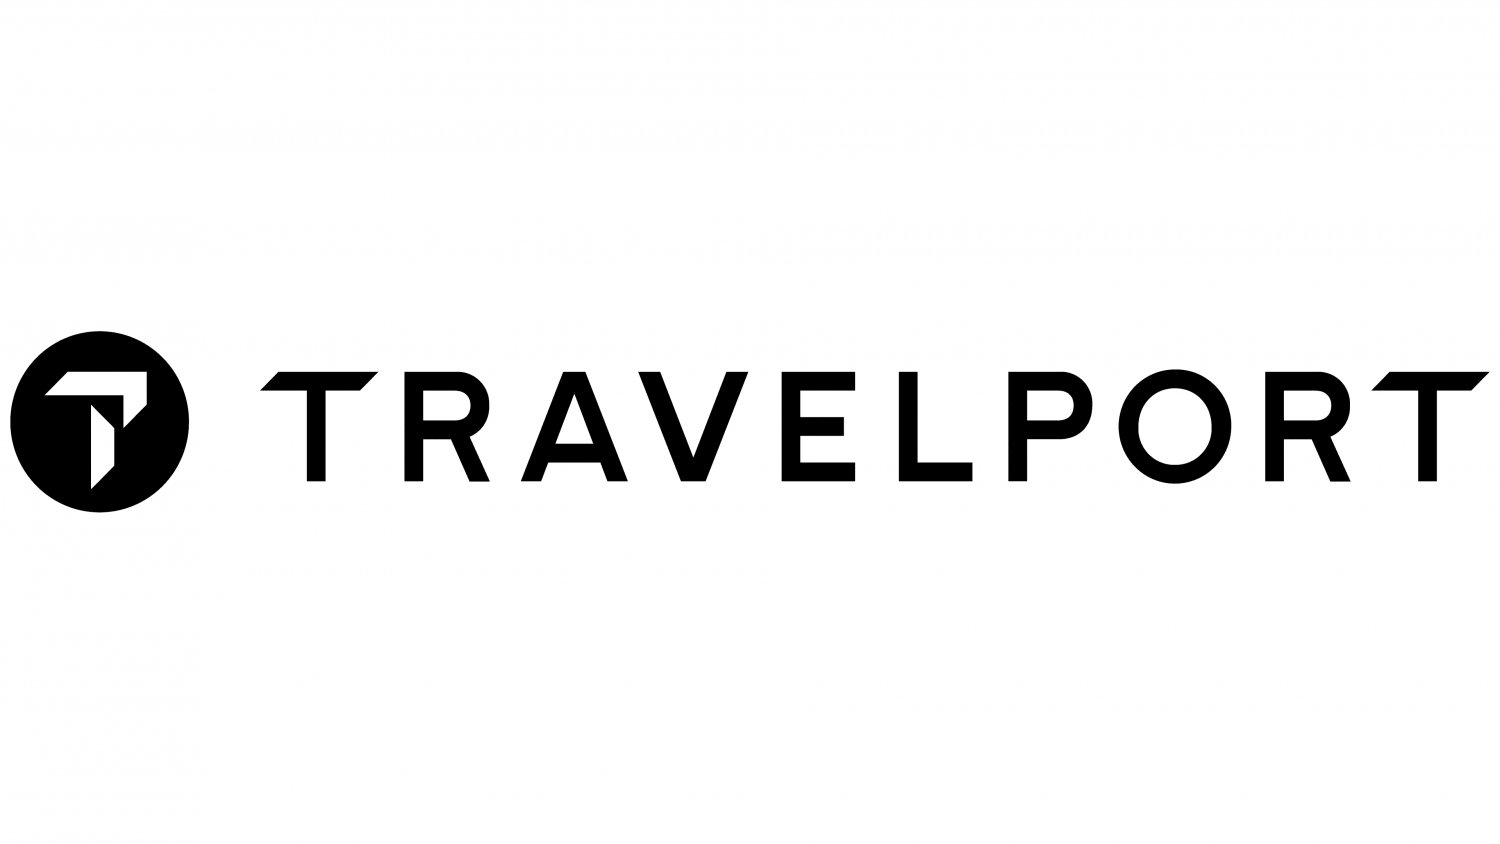 MY GUIDE NETWORK SELECTS TRAVELPORT TO EXPAND, PERSONALIZE CONTENT WITH TRAVELPORT+